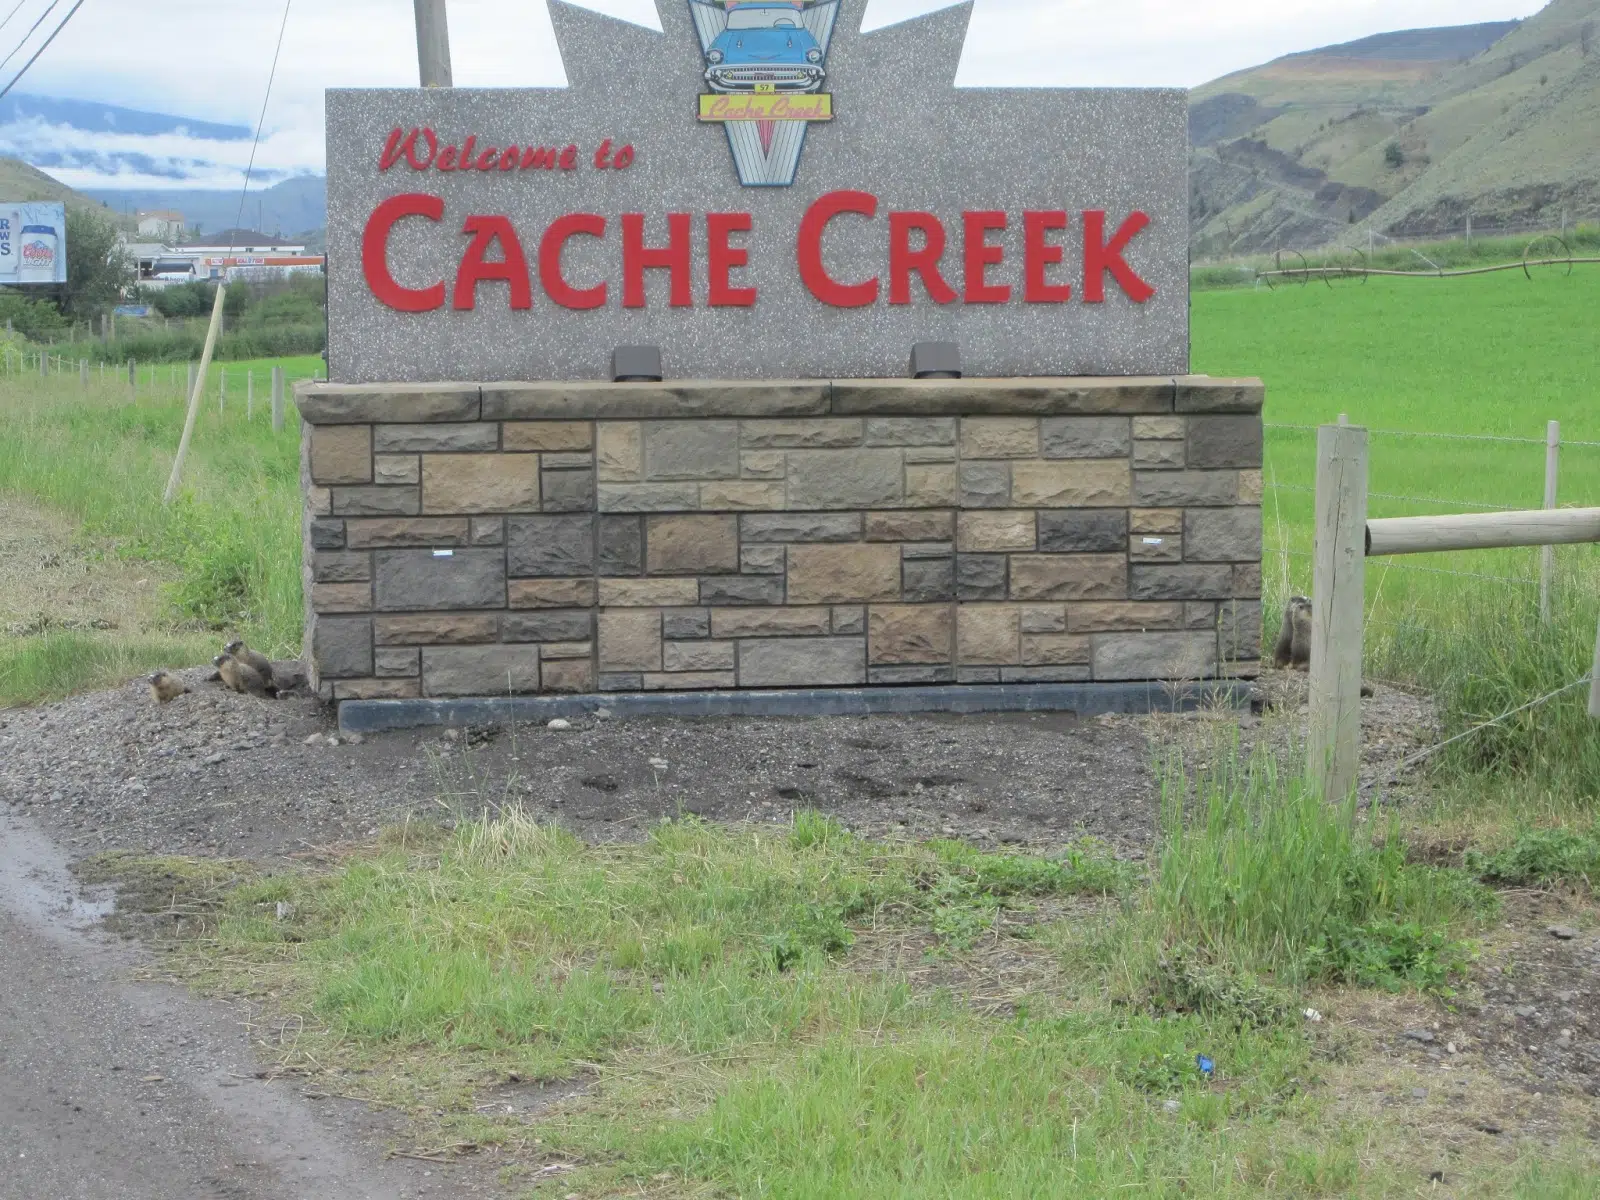 Could be another bad year for flooding in Cache Creek